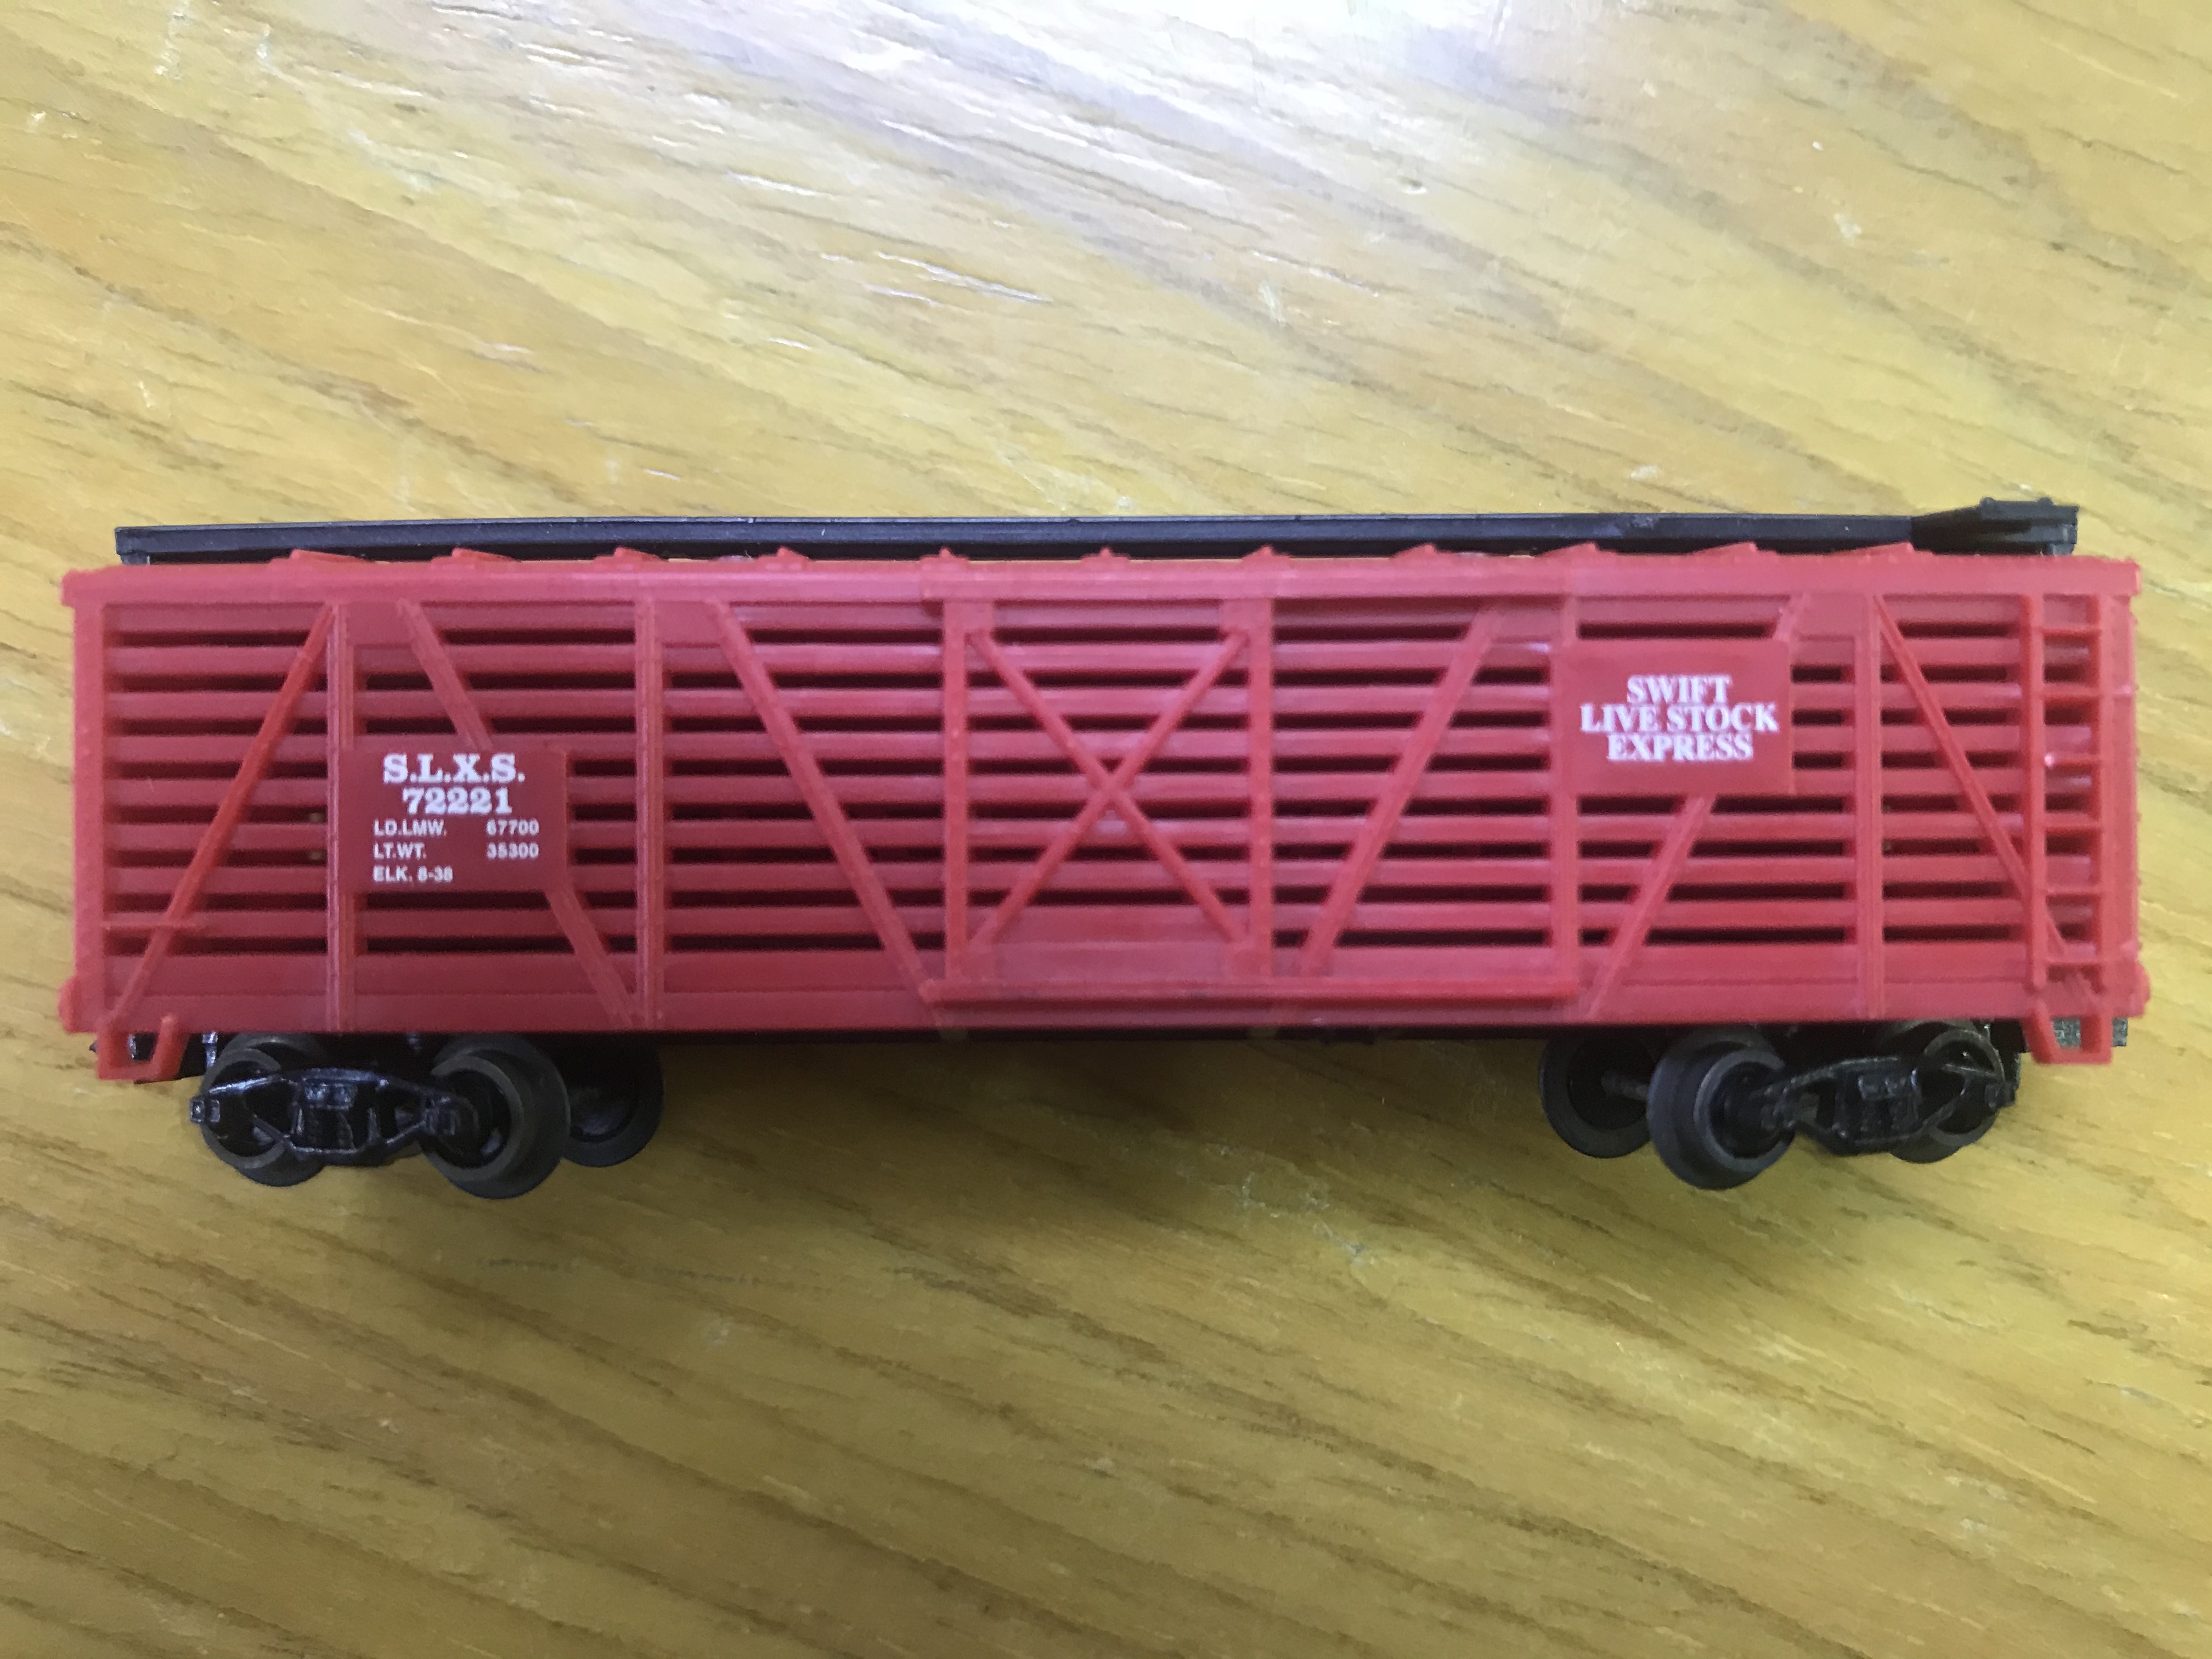 Preowned N Scale Bachmann Red Freight wagons.